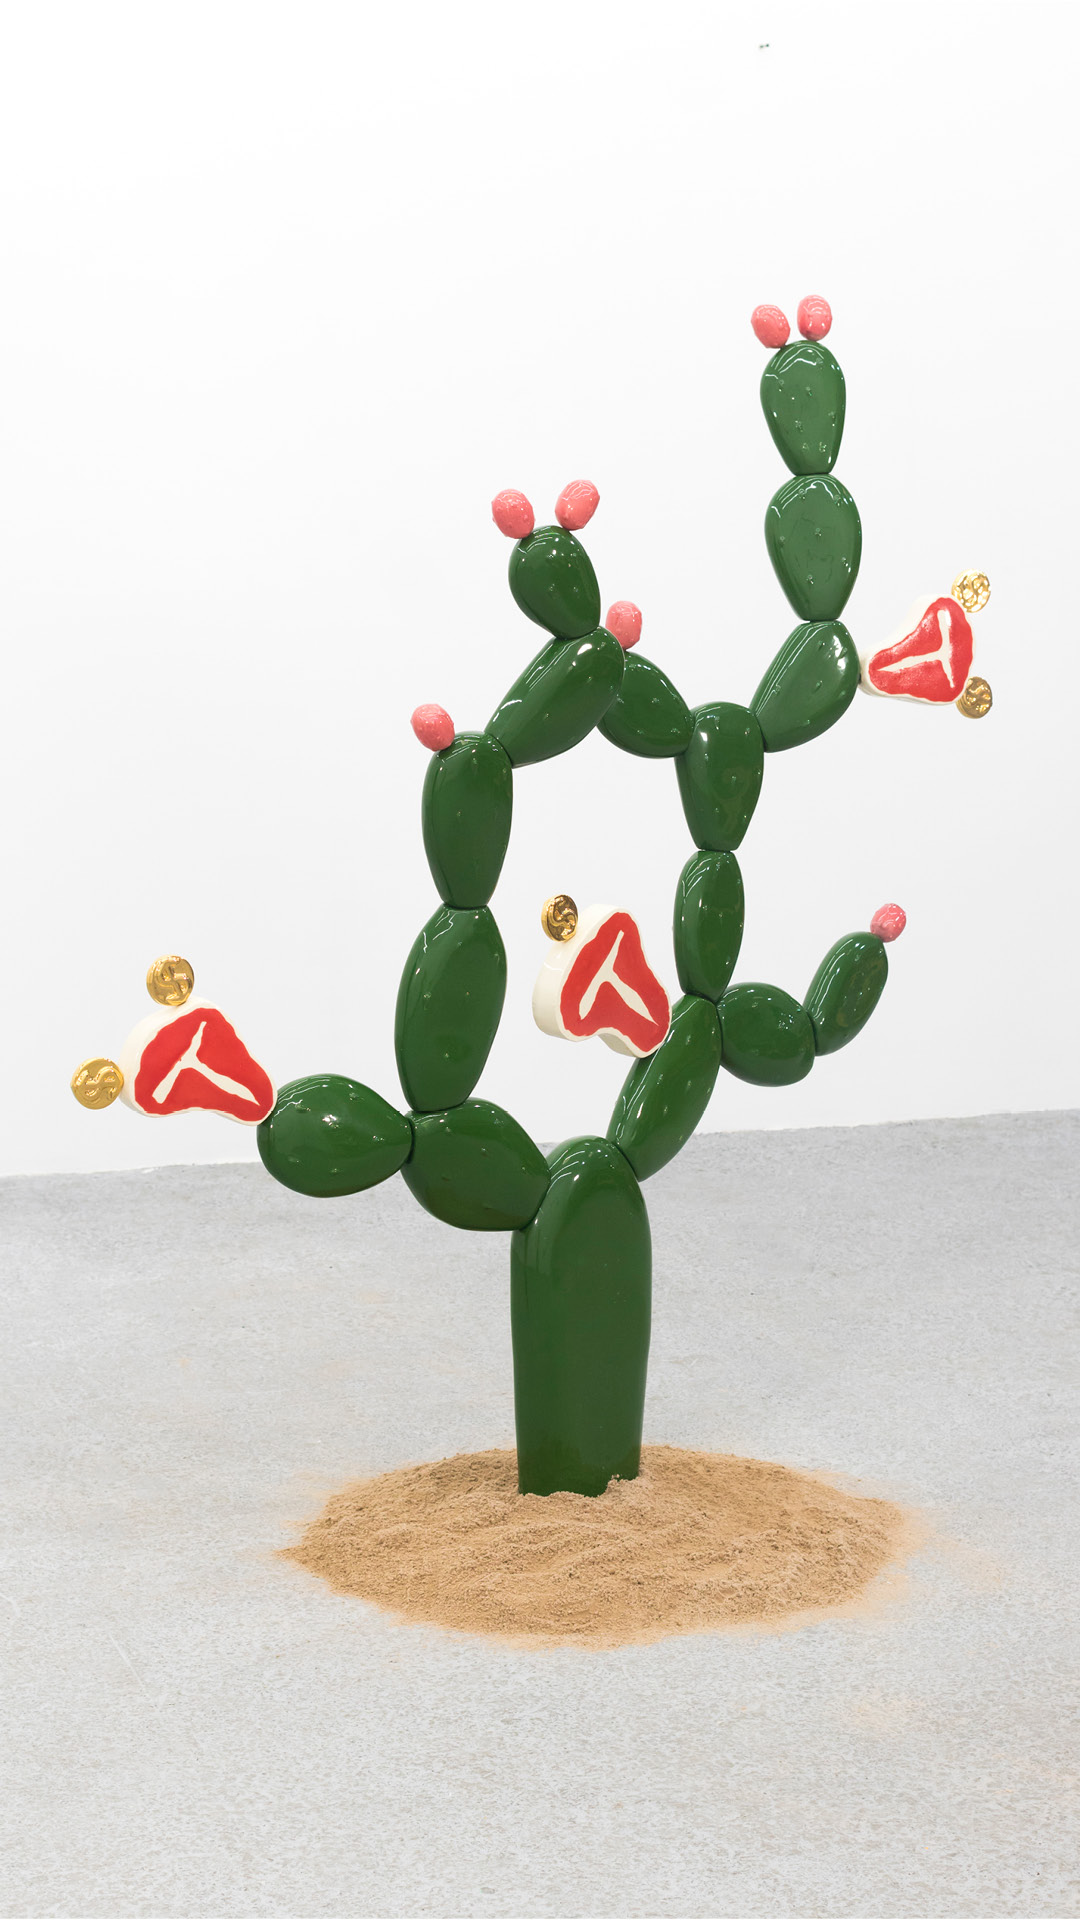 A sculpture of a cactus growing raw steaks and gold coins is displayed in a small pile of sand